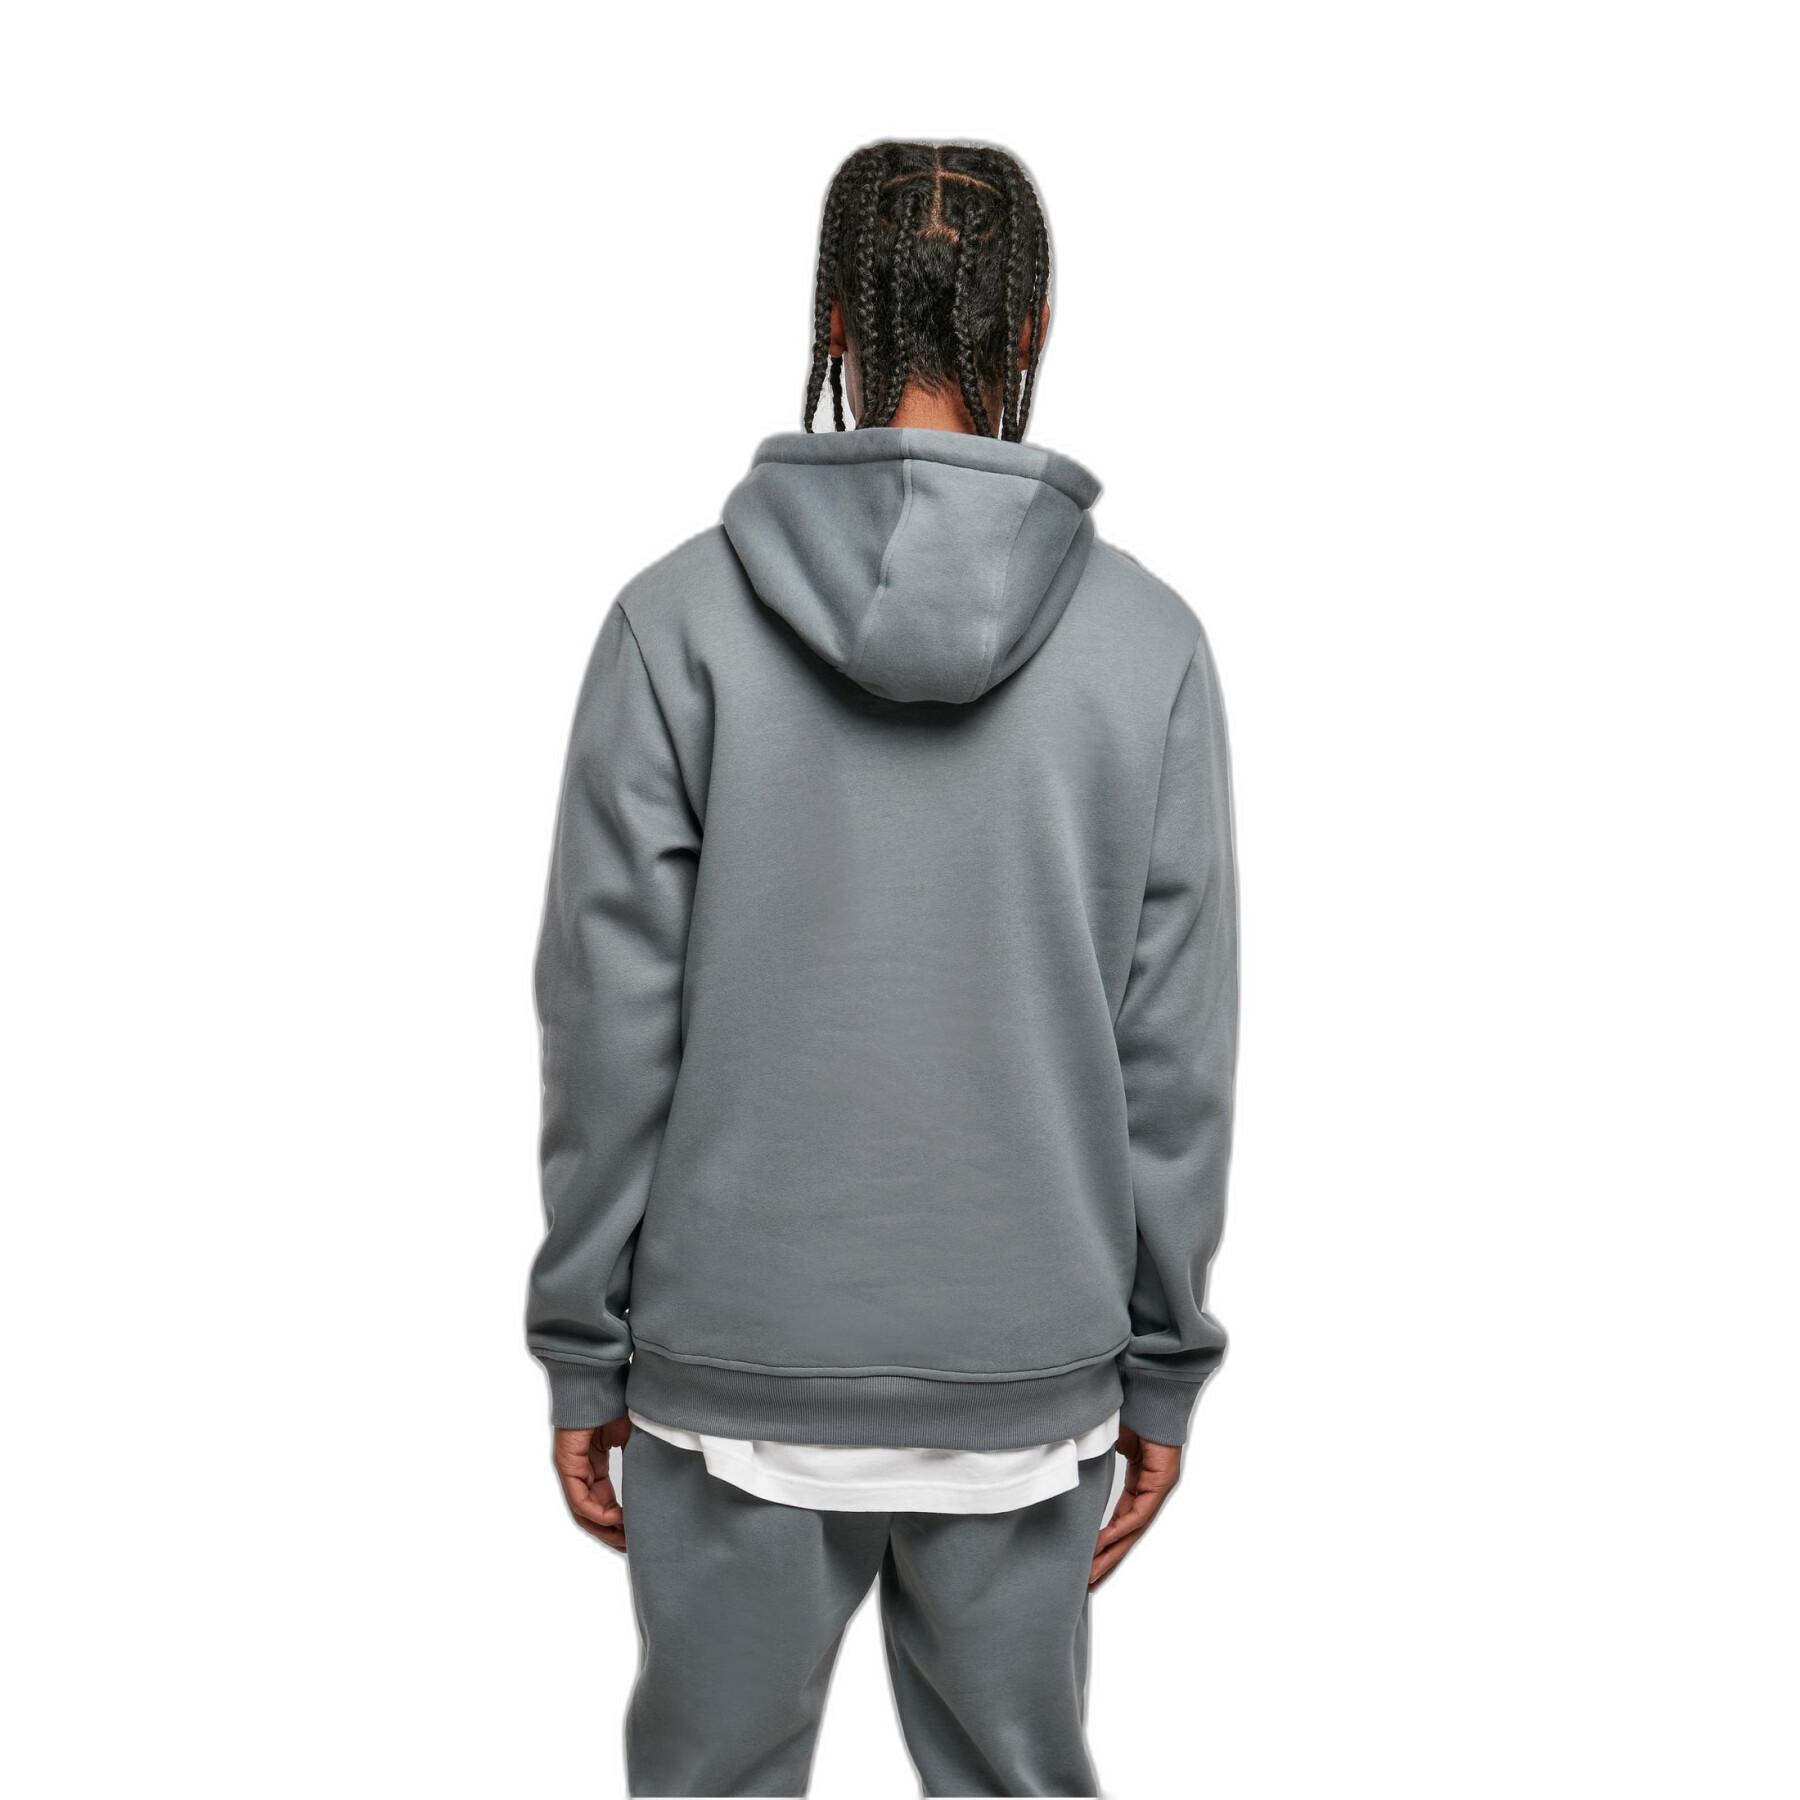 Hoodie with logo Starter The Classic